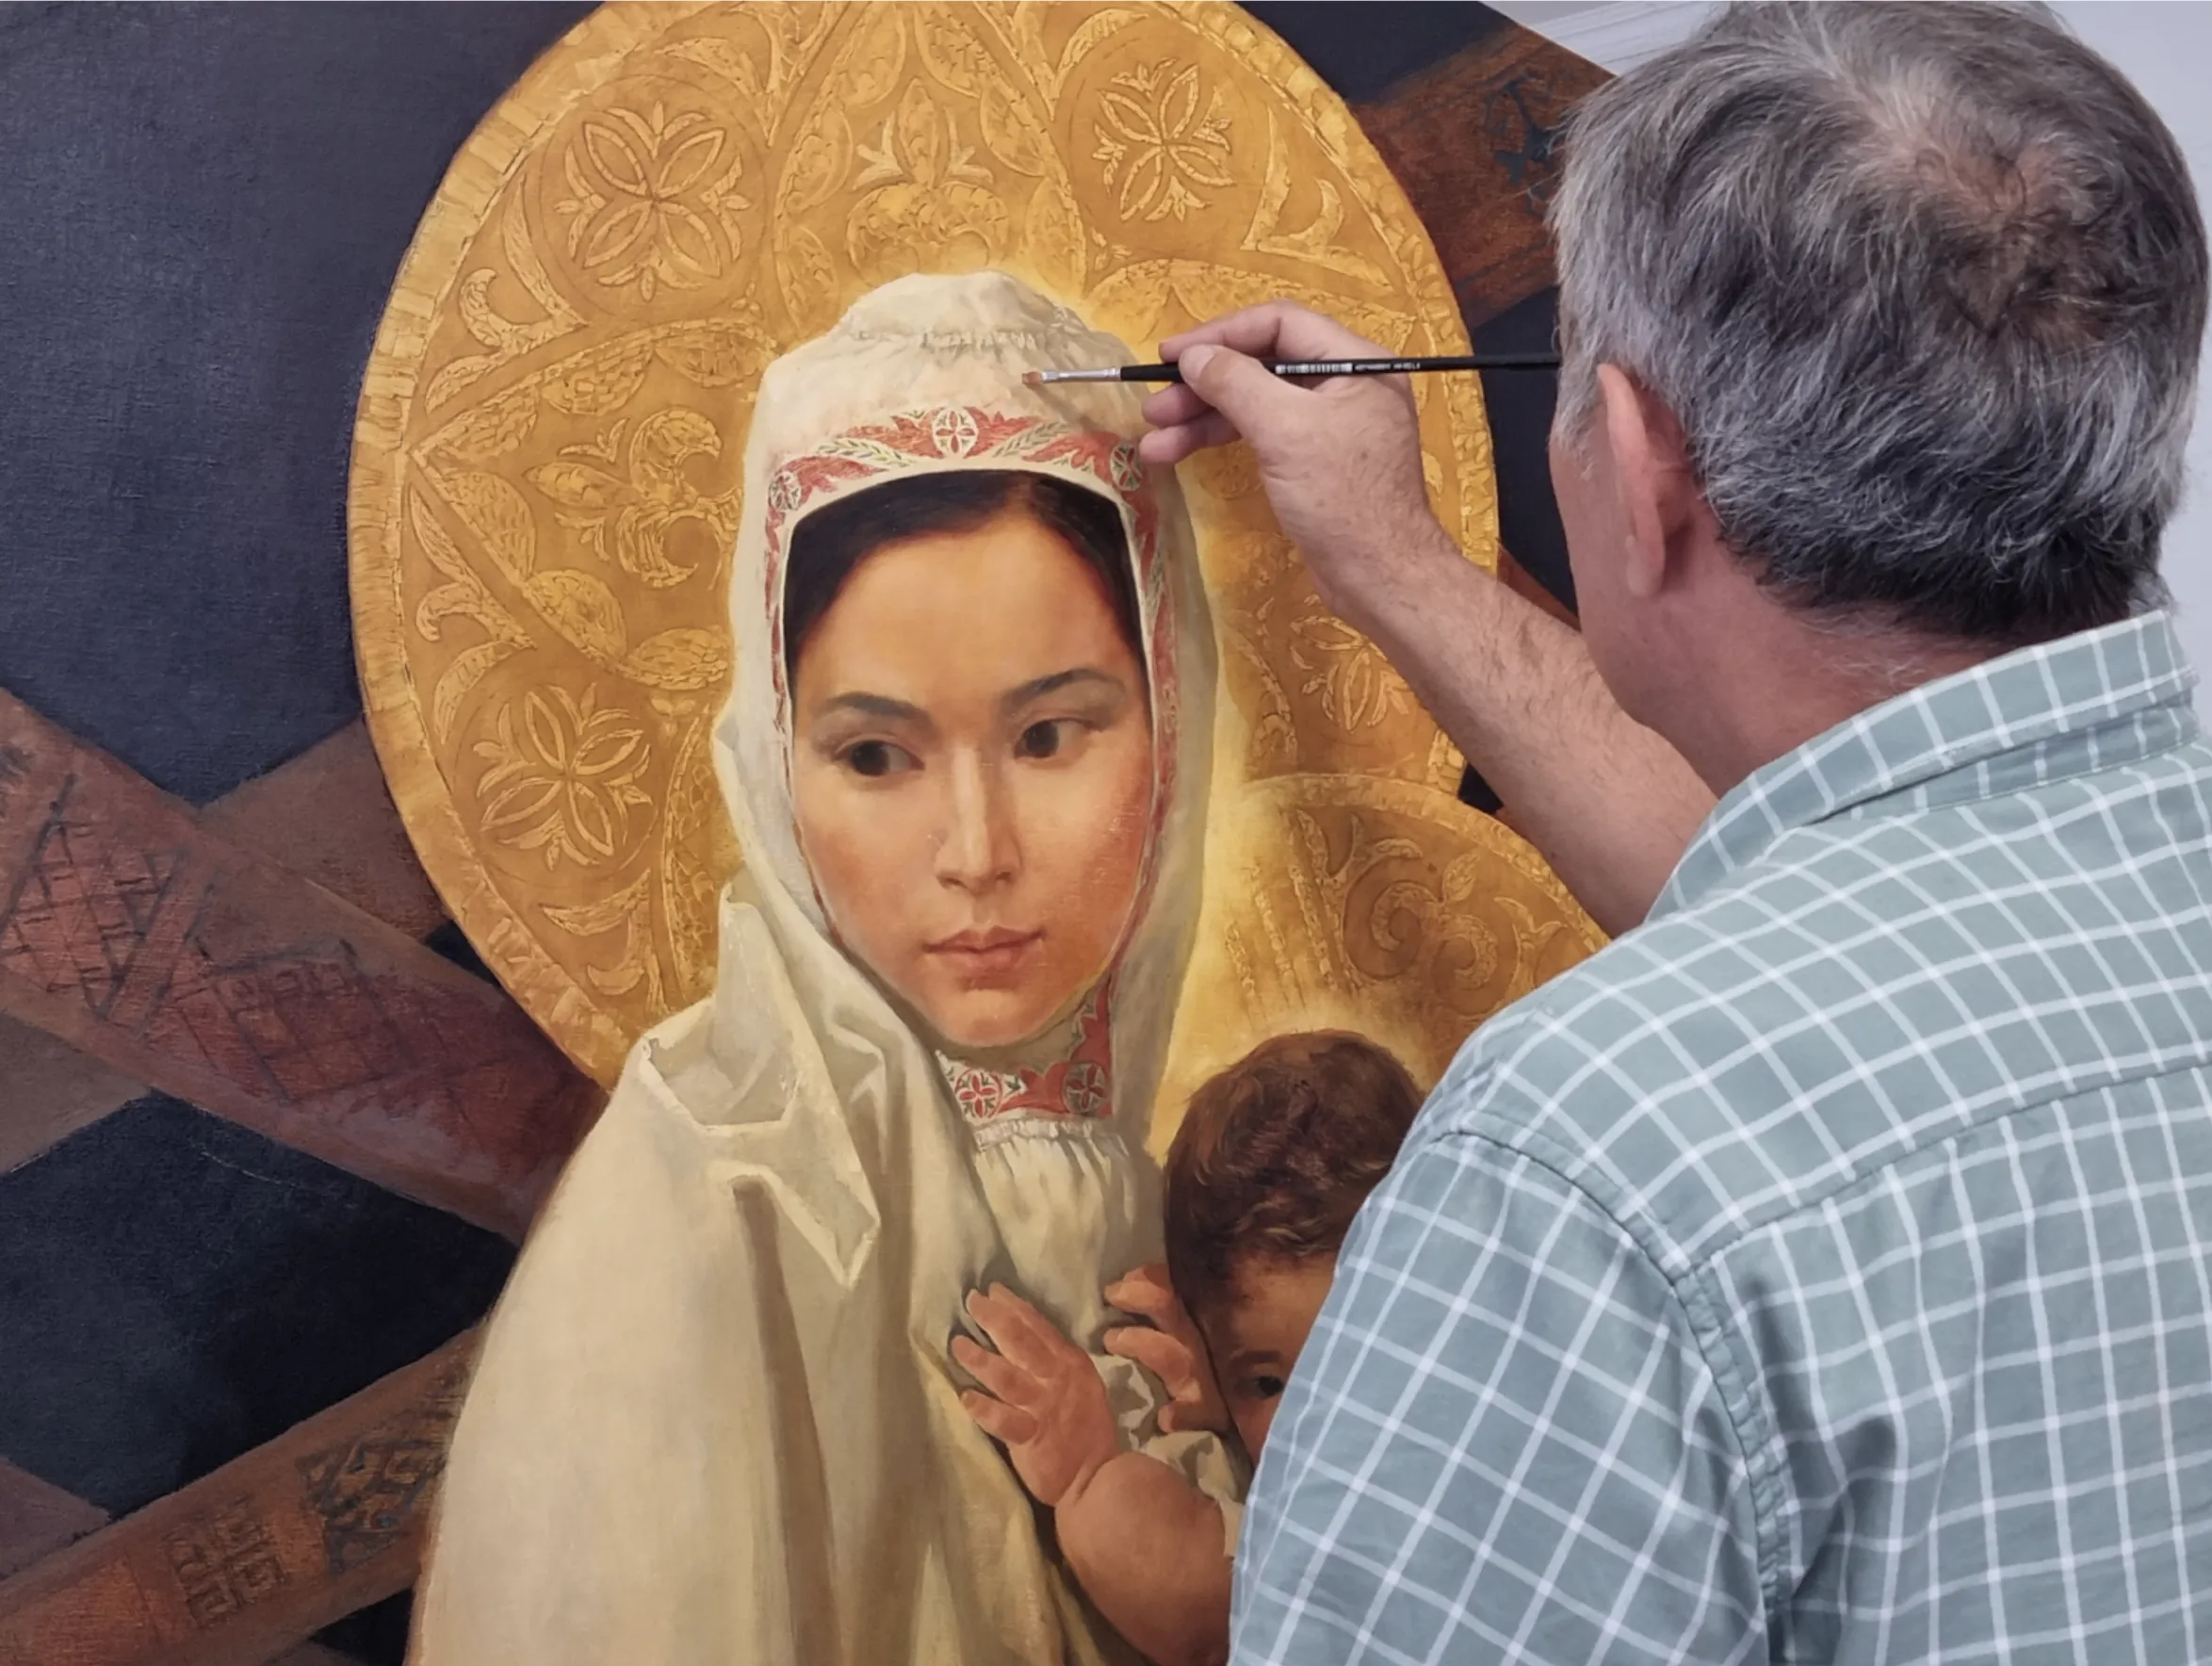 Kazakh artist Dosbol Kasymov works on the icon “Mother of the Great Steppe” in advance of Pope Francis’ Sept. 13-15 trip to Kazakhstan.?w=200&h=150